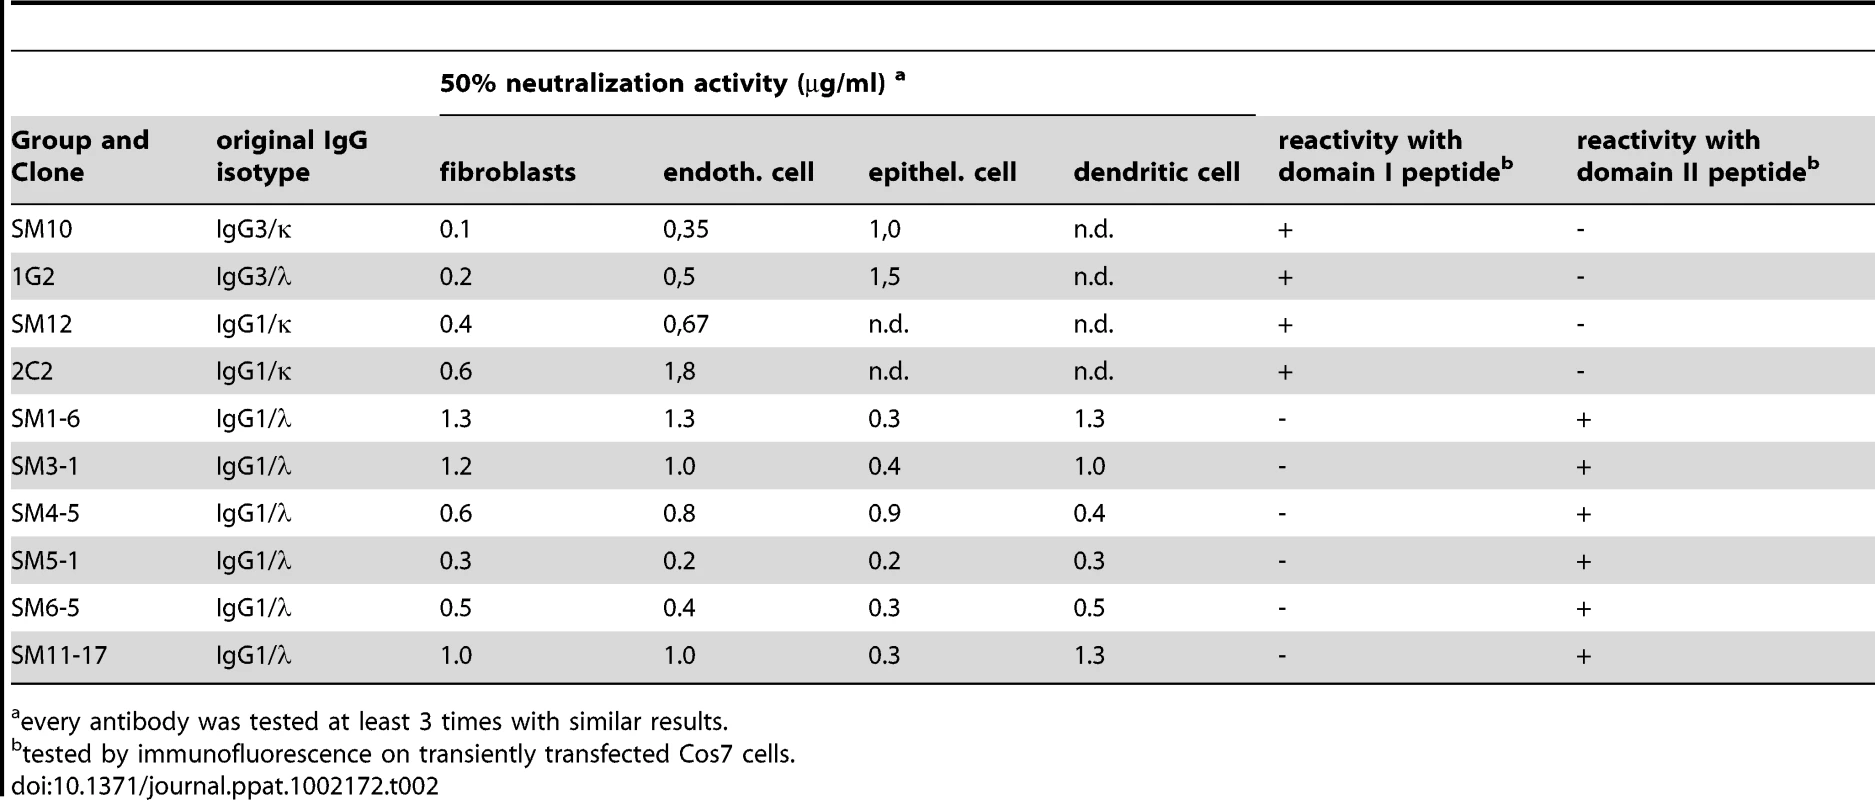 Neutralization capacity and reactivity pattern of recombinantly expressed human monoclonal antibodies.